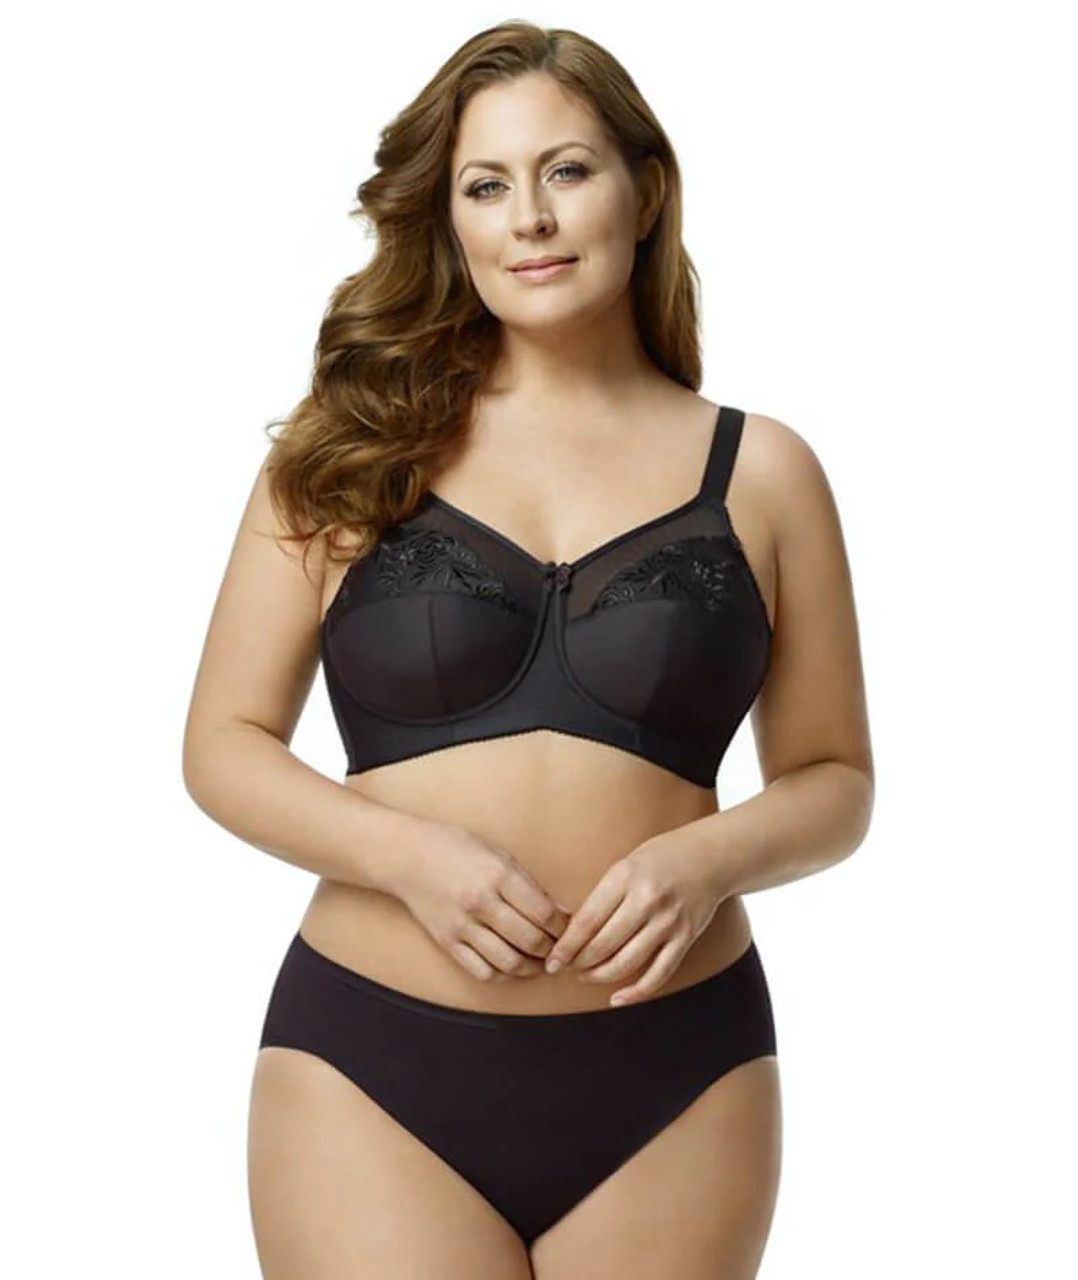 Elila Embroidered Soft Cup Bra in Black